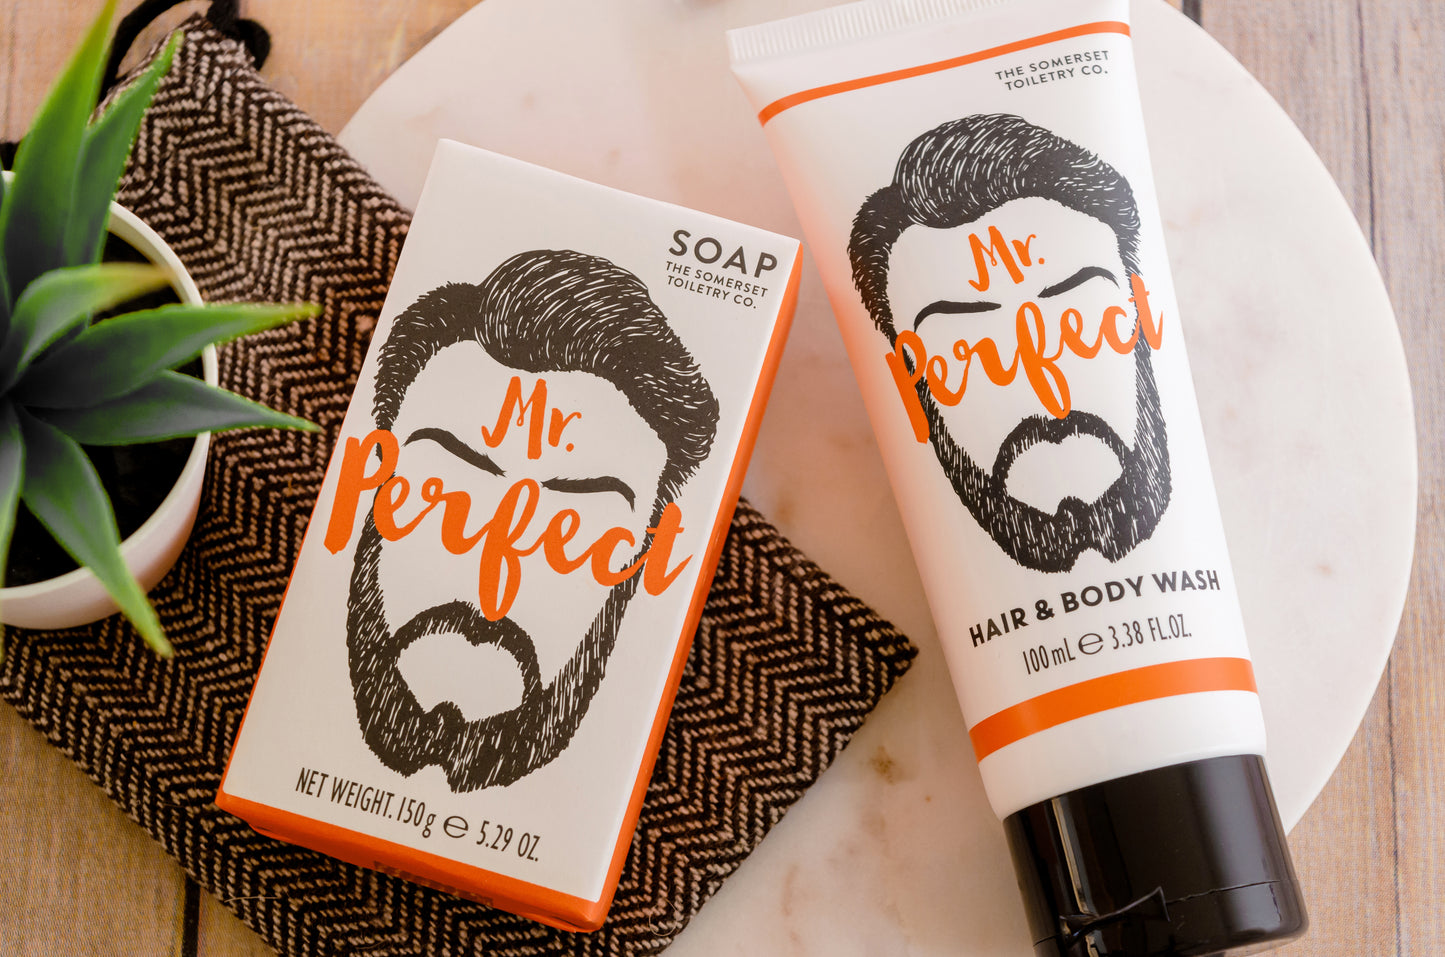 Mr Perfect Soap & Body Wash Gift Set – Spearmint and Patchouli